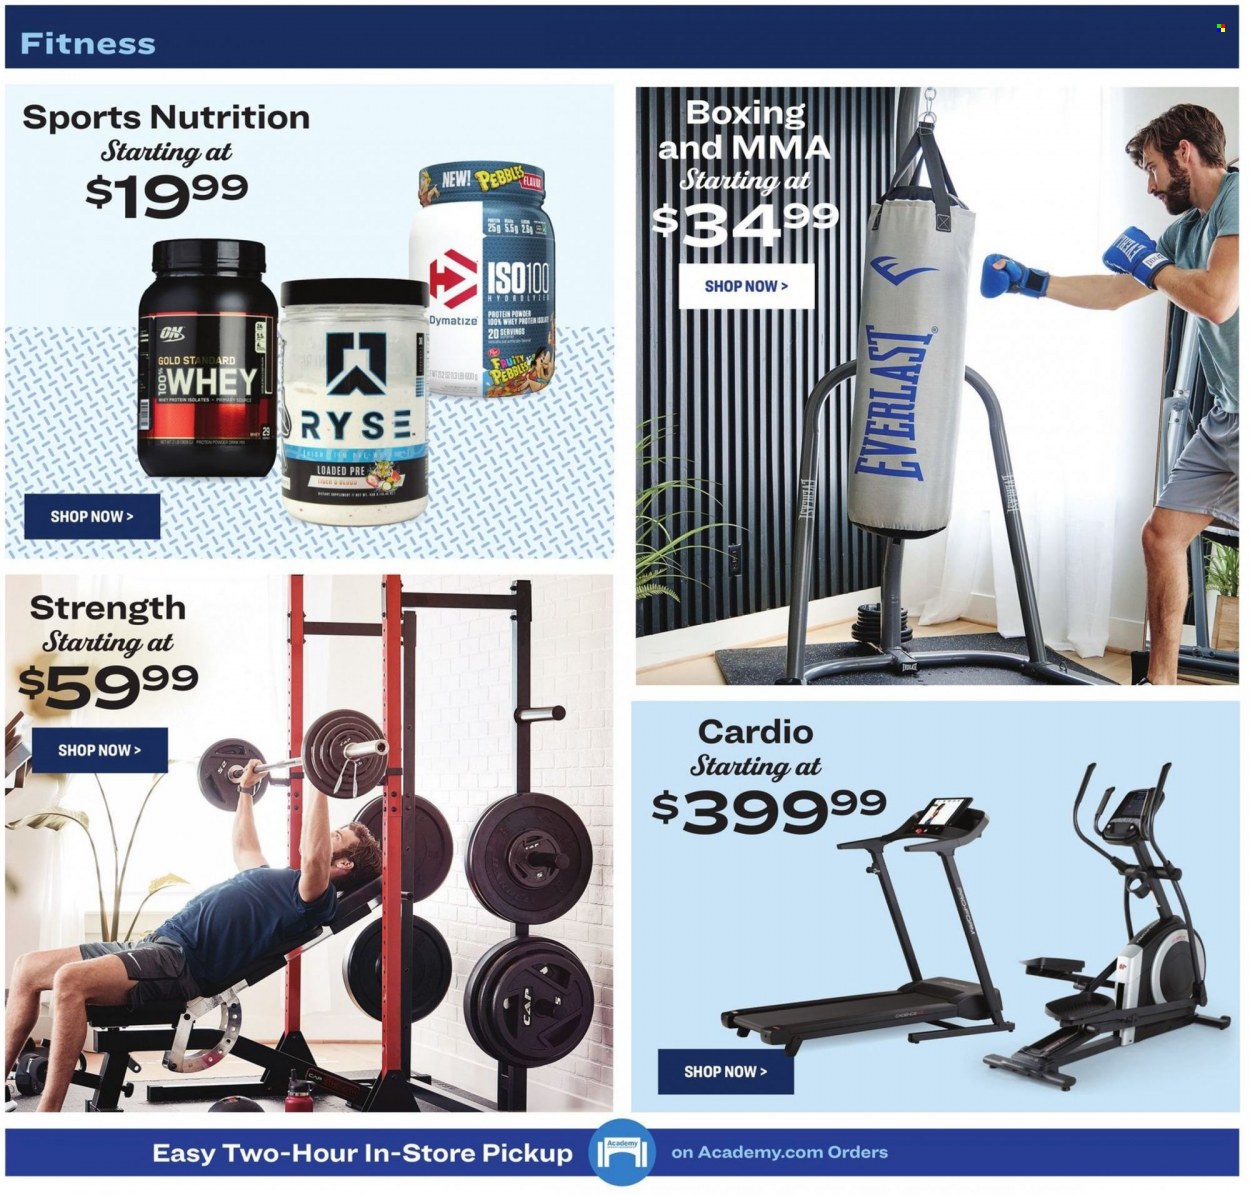 Academy Sports + Outdoors ad  - 01.30.2023 - 02.26.2023.